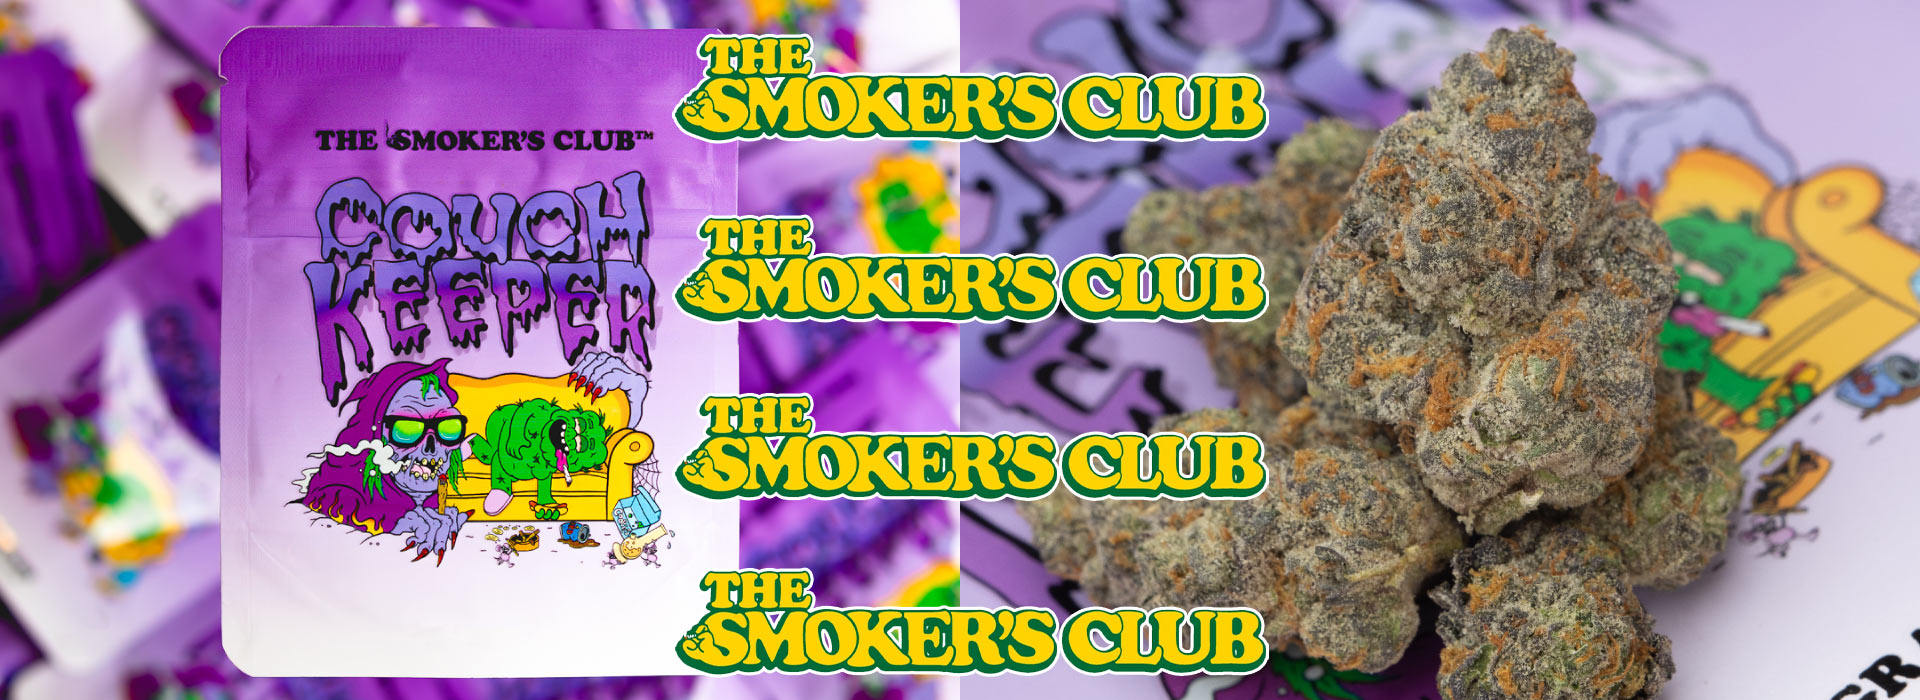 The Smoker's Club - Couch Keeper Review & Unboxing